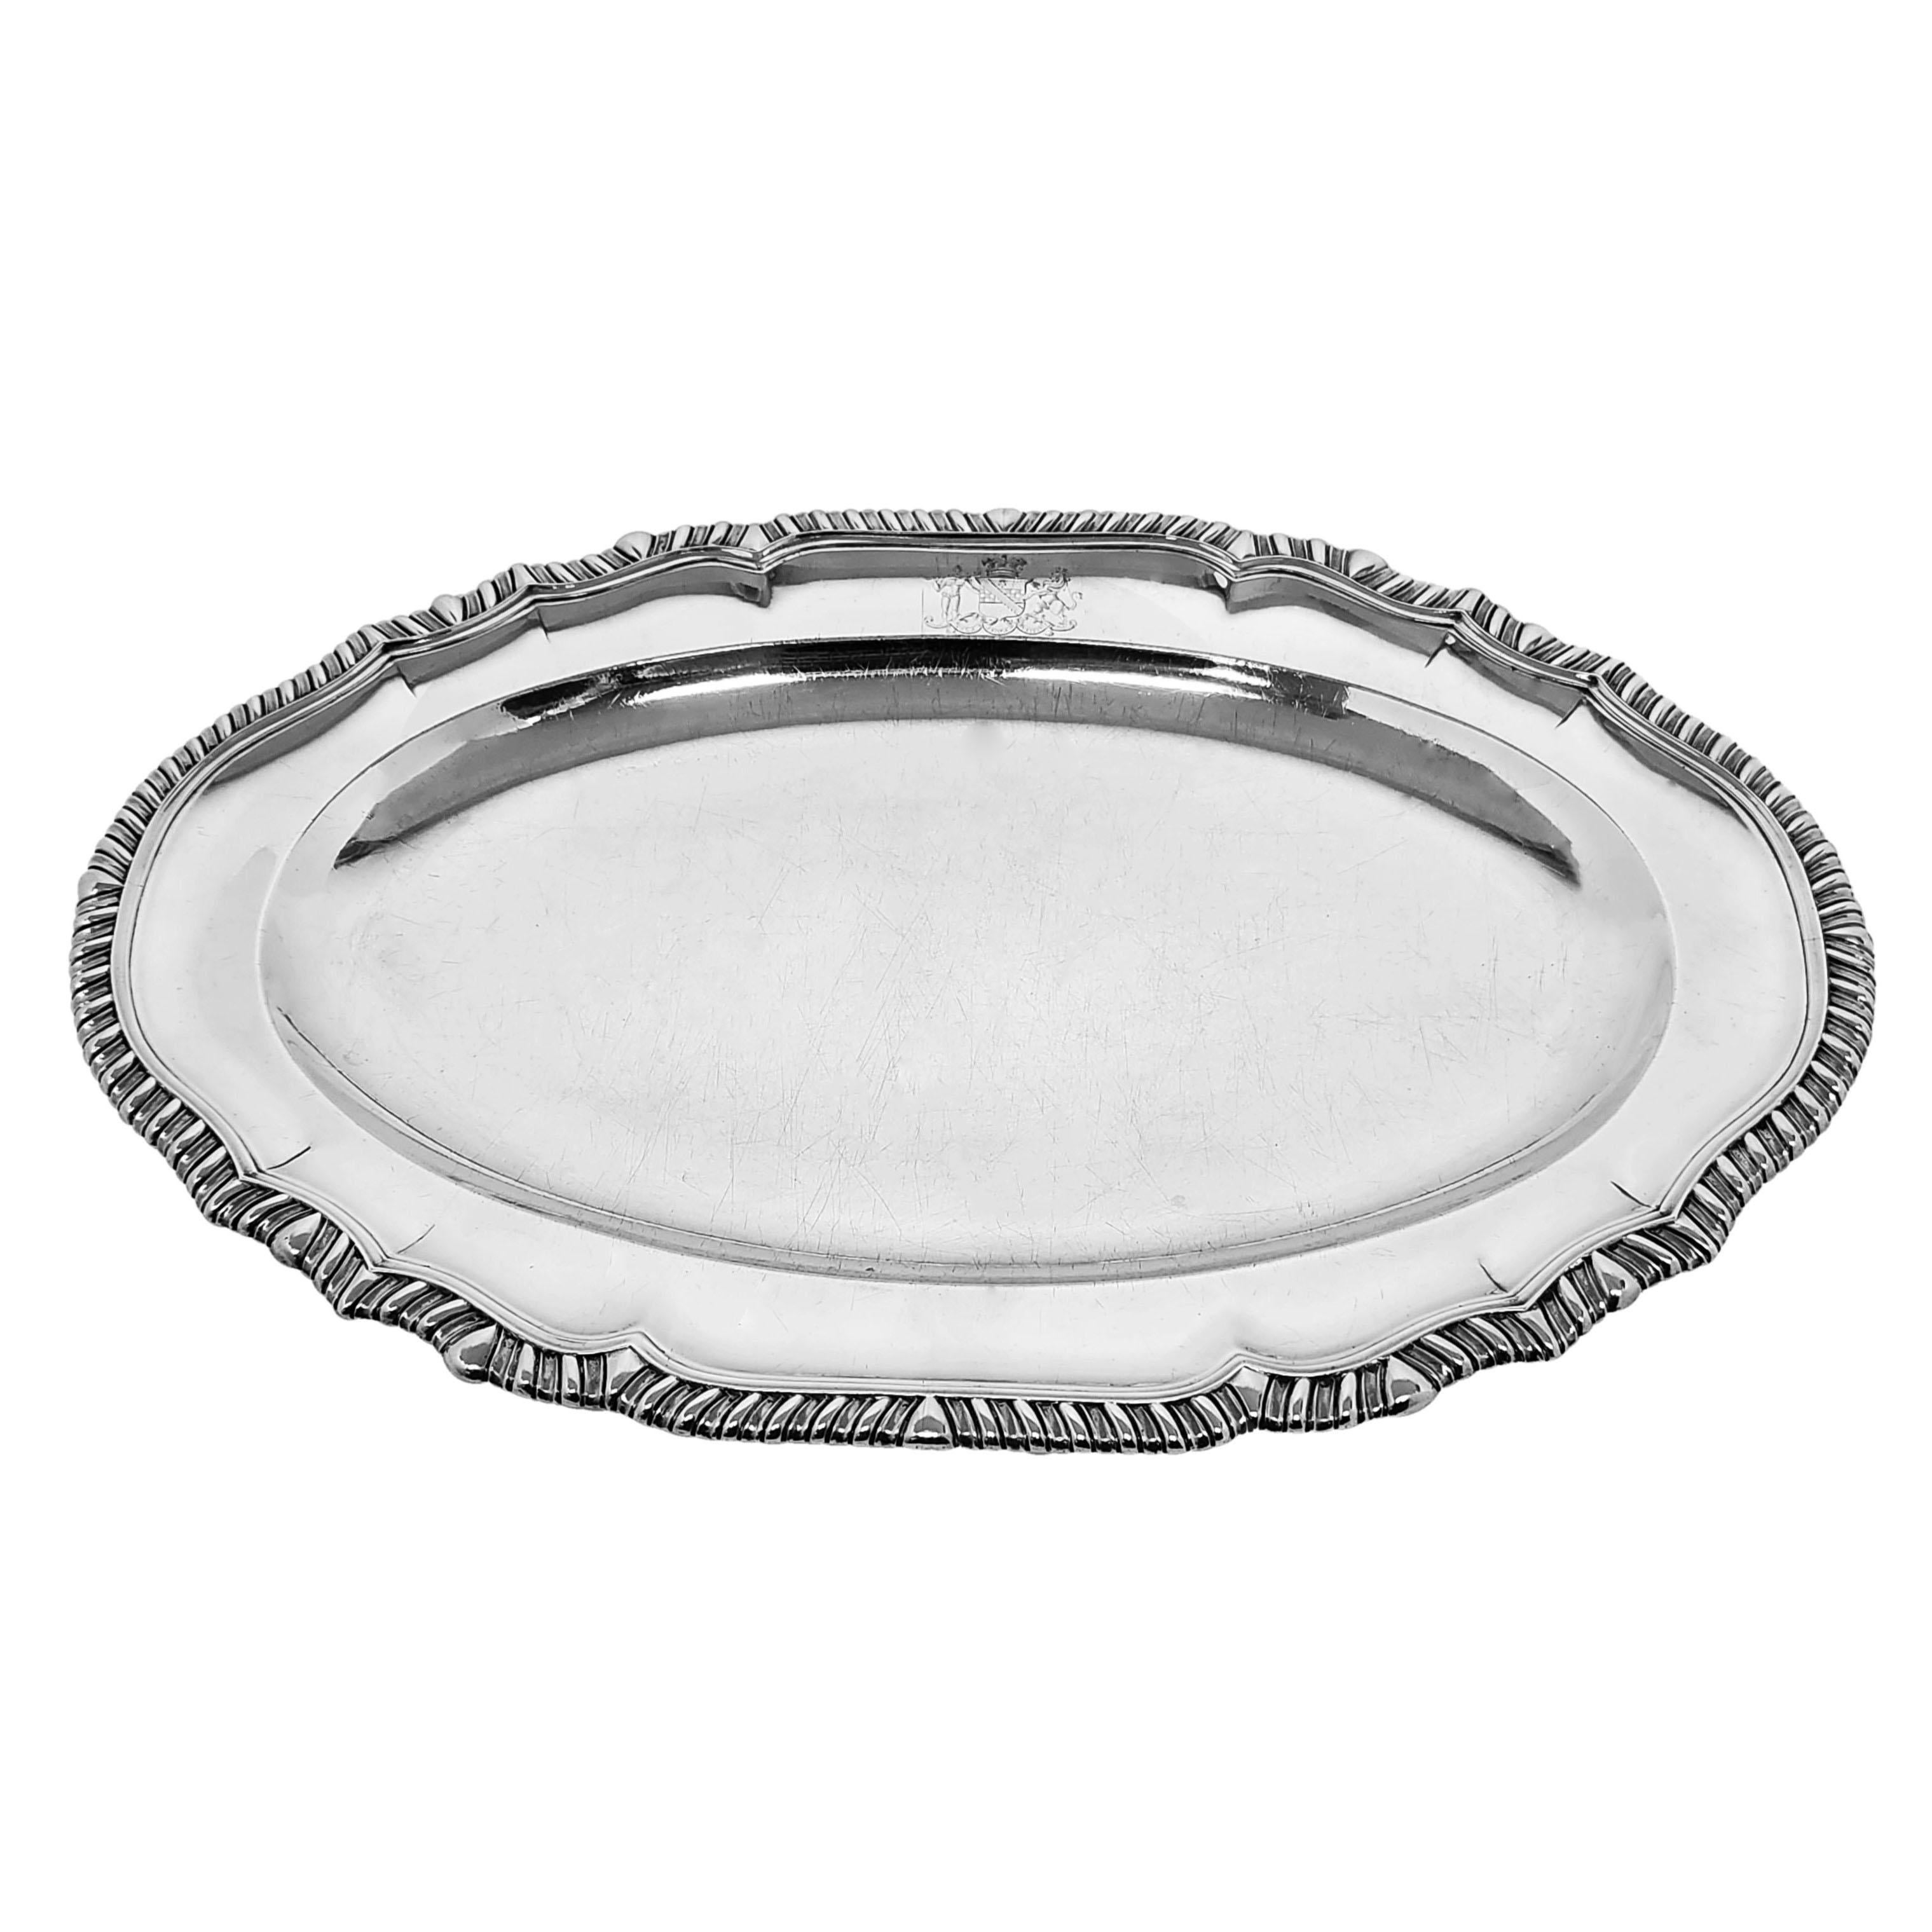 Antique Georgian Silver Serving Platter Meat Platter 1806 Shaped Oval Gadroon In Good Condition For Sale In London, GB